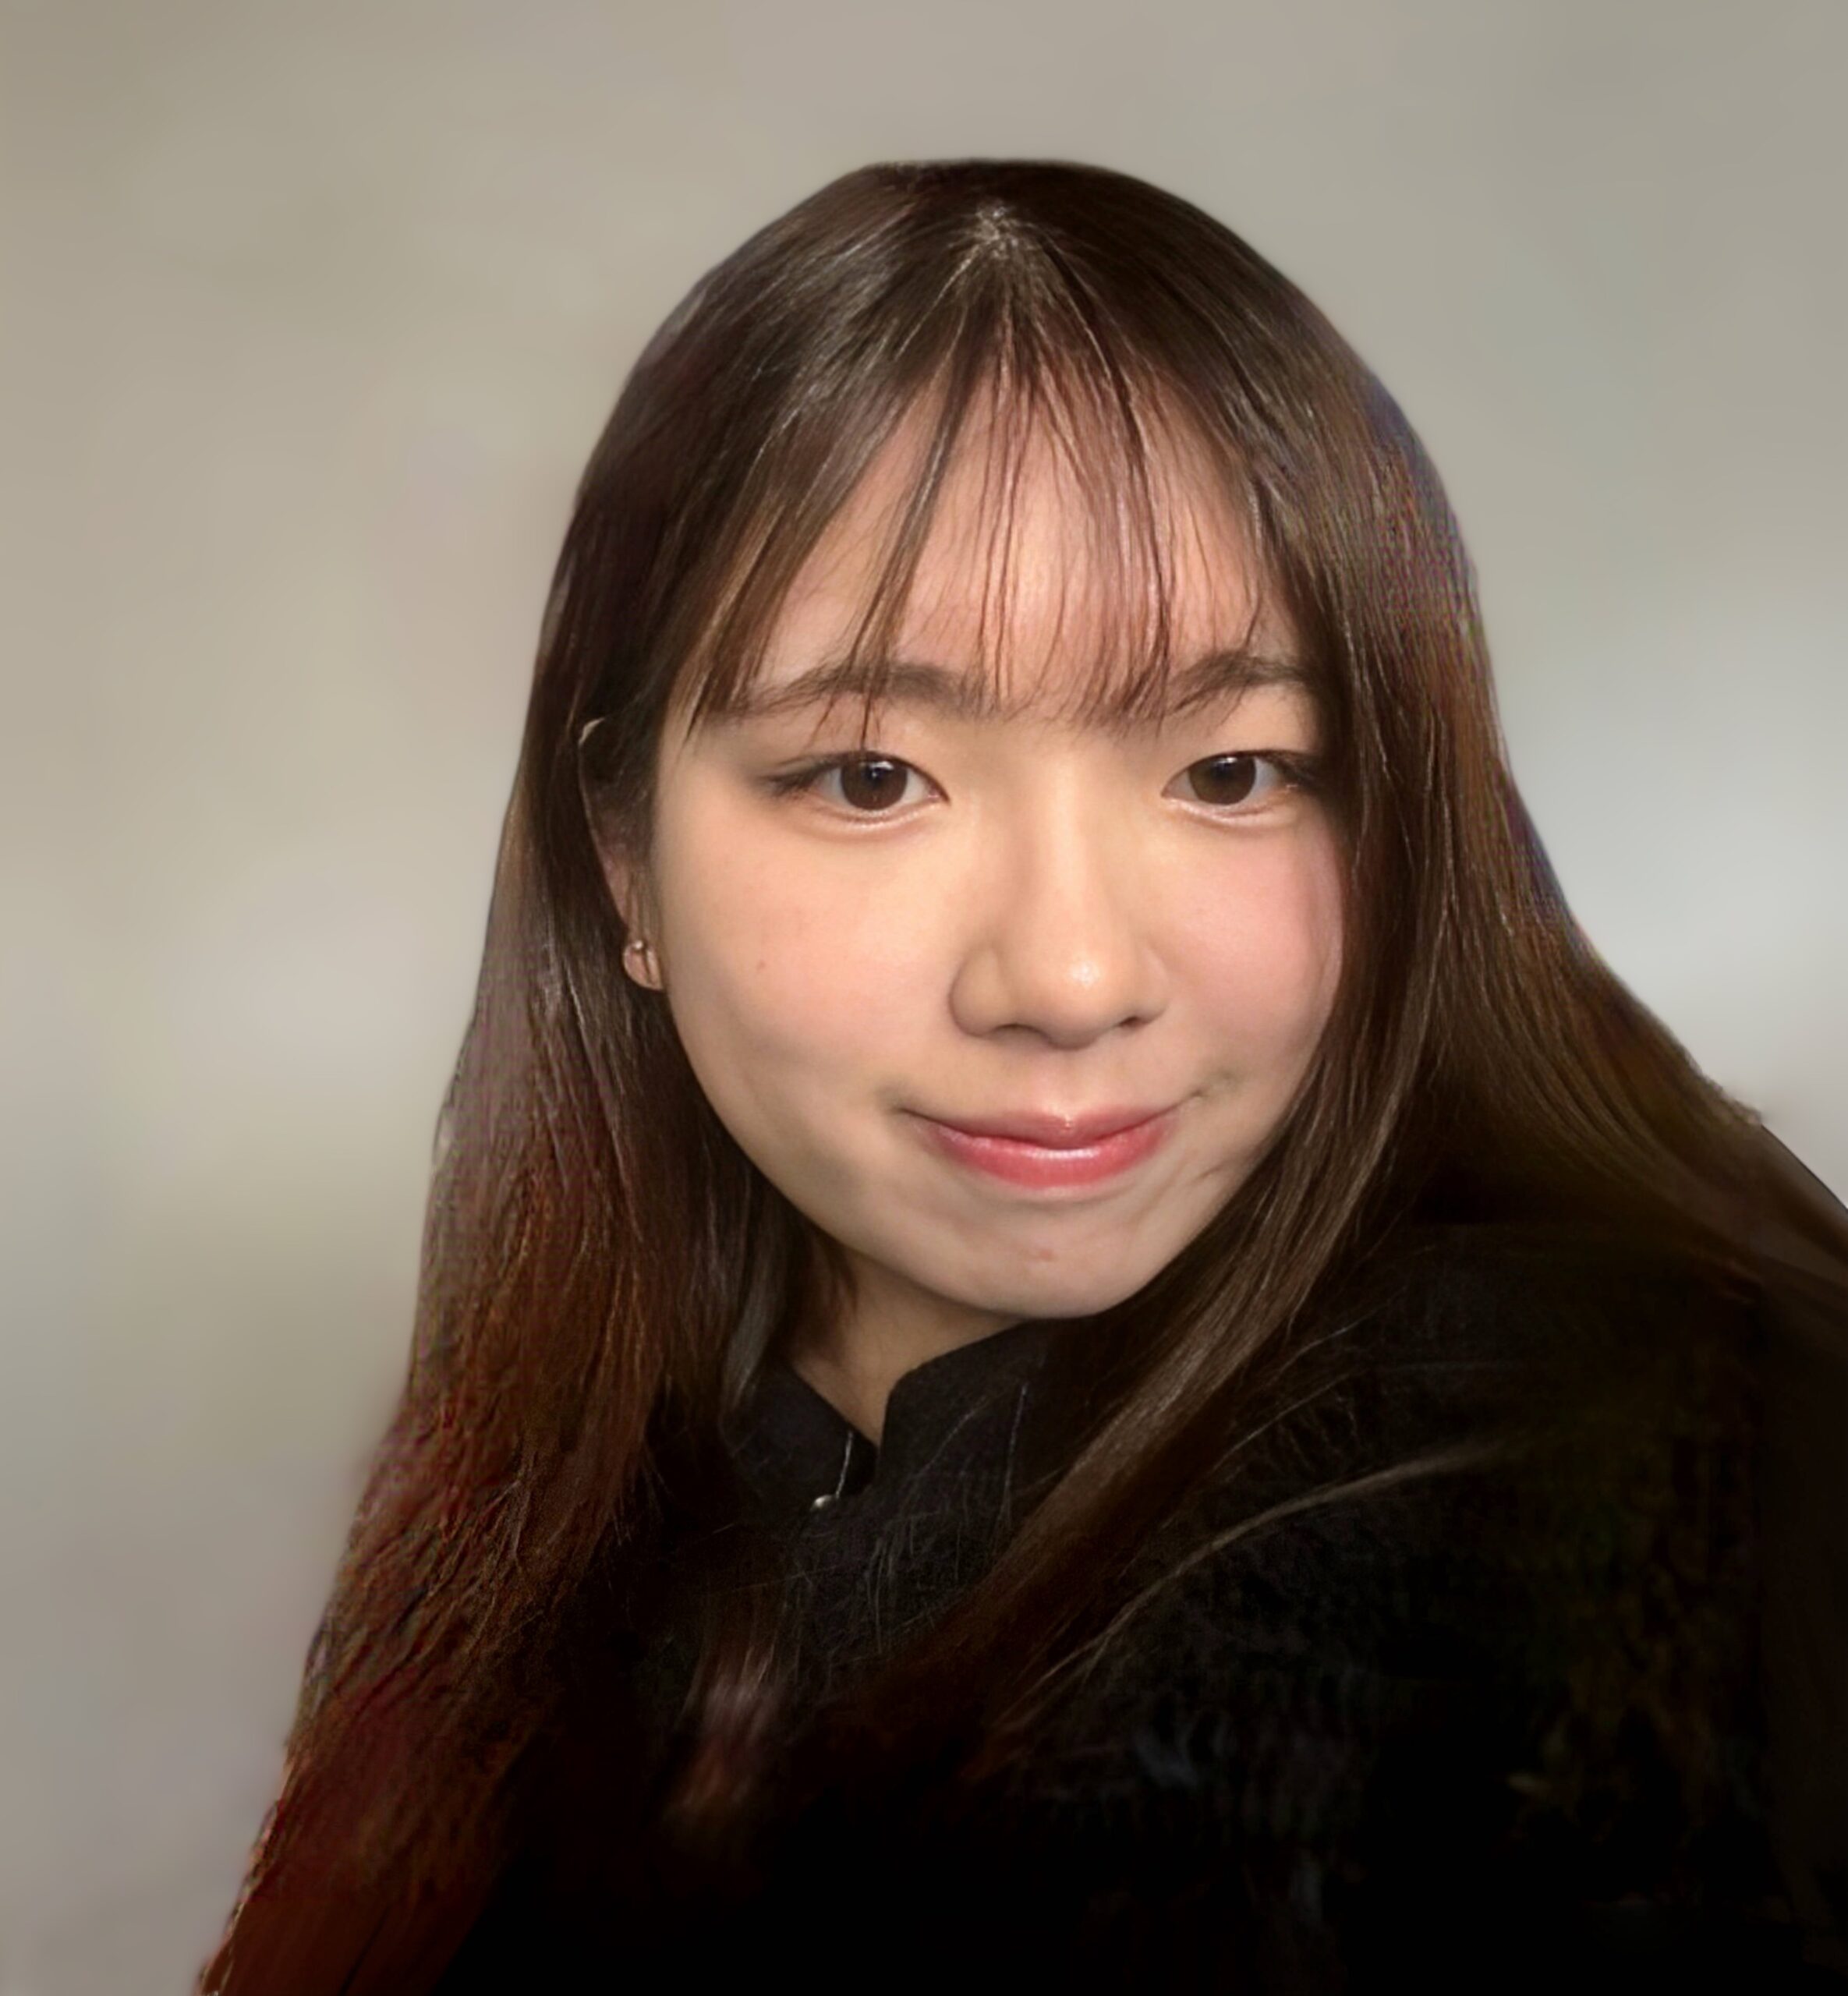 Claire Yao, with long hair and fringe, wearing a black top, looks at the camera with a slight smile against a neutral background.